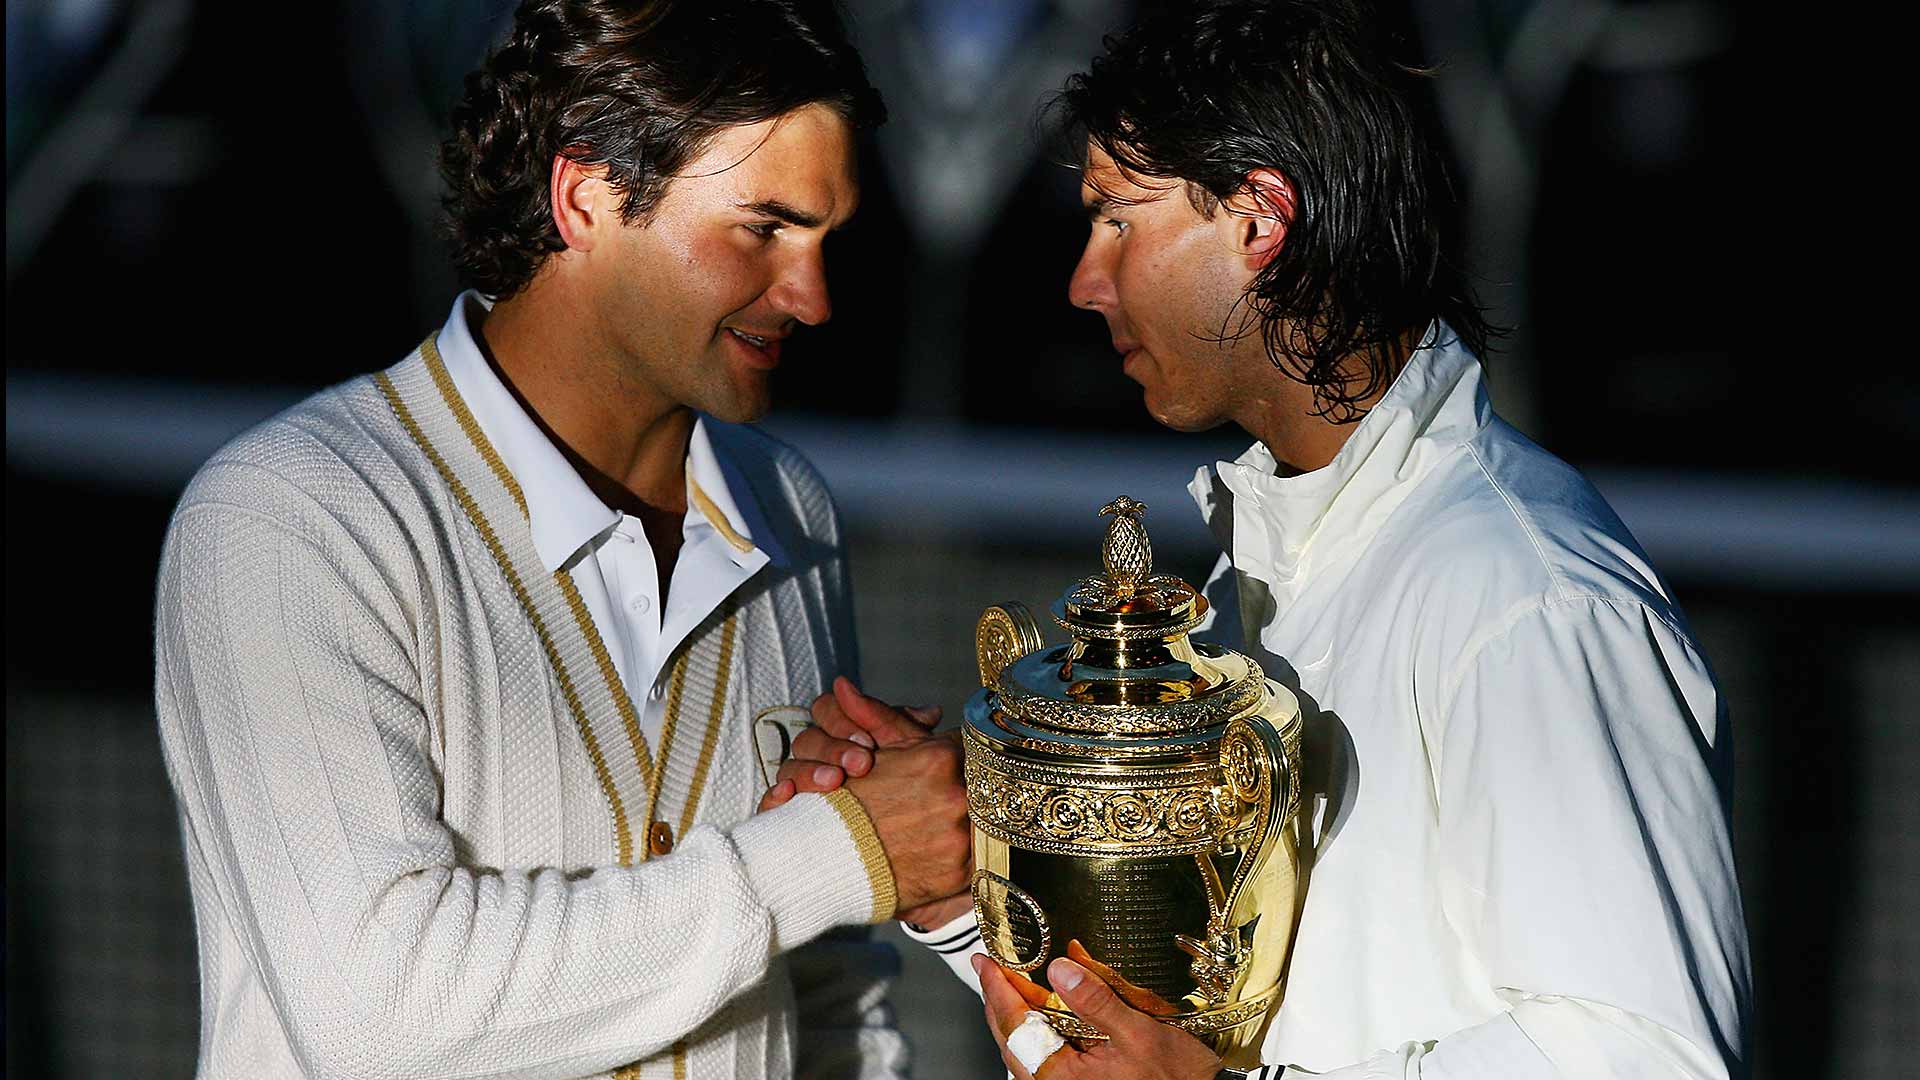 Roger Federer congratulates Rafael Nadal, who prevailed in a 9-7 fifth set in the 2008 Wimbledon final.